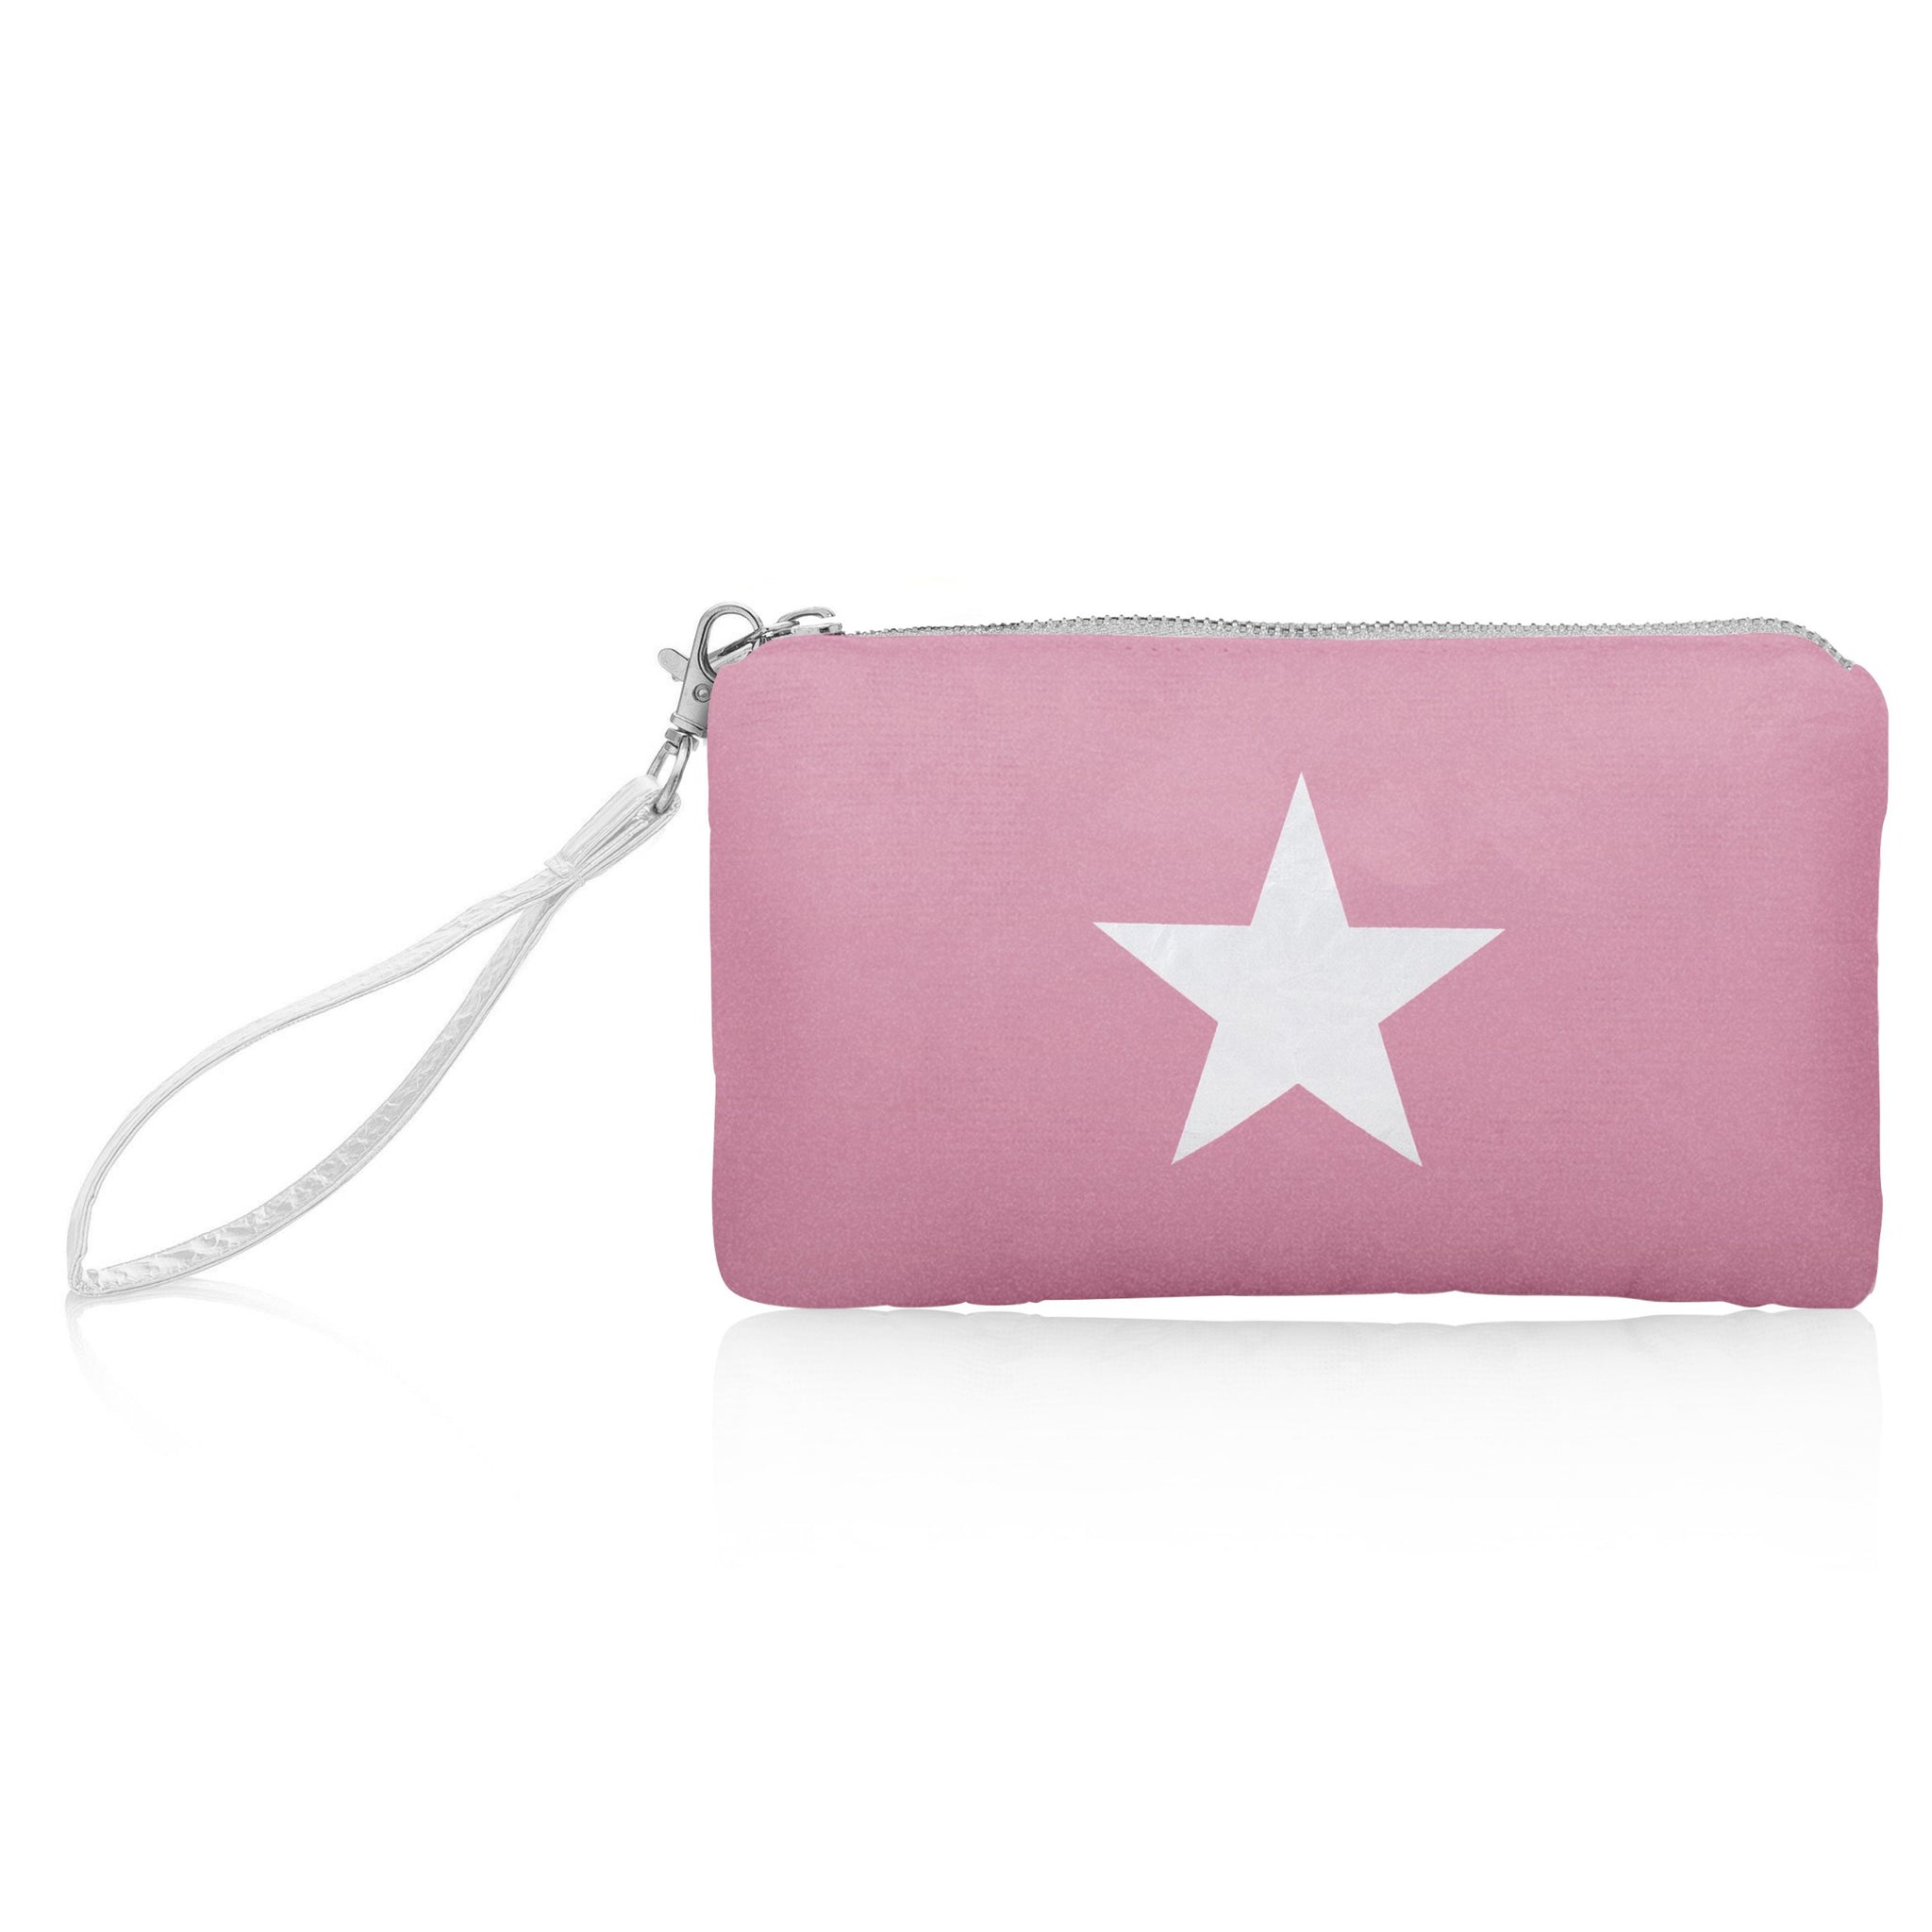 Zip Wristlet - Fairy Pink with Silver Star